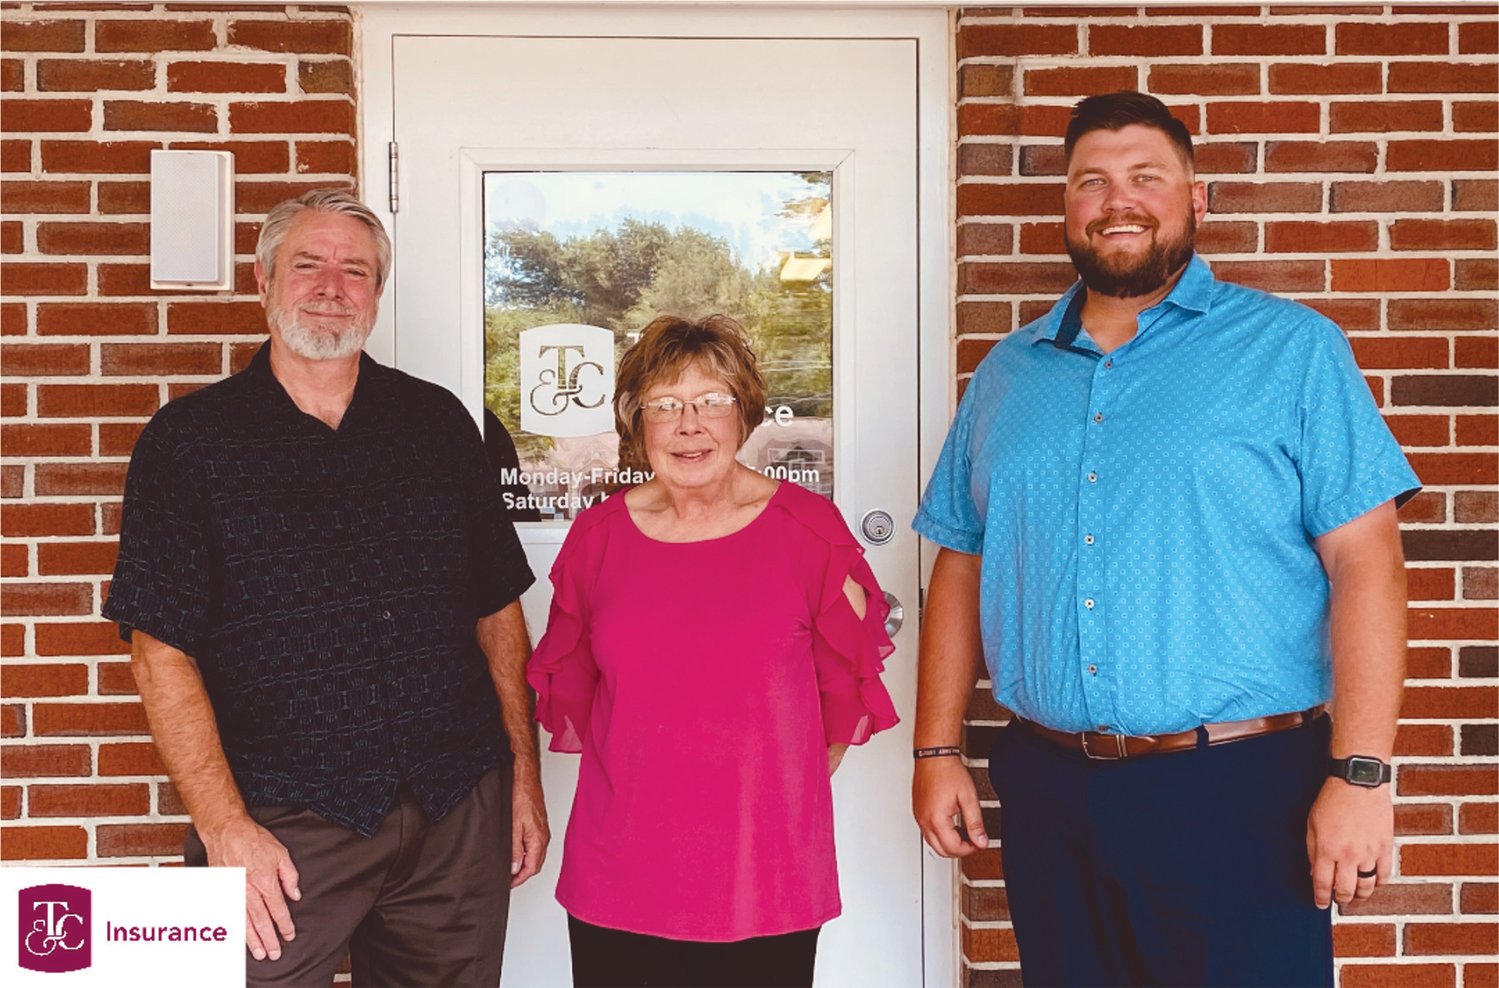 Shown, from left:  Mike Elliott, Town & Country Insurance Agency Manager, Diana Peabody and Ryne Armstrong, Town & Country Insurance Branch Manager.